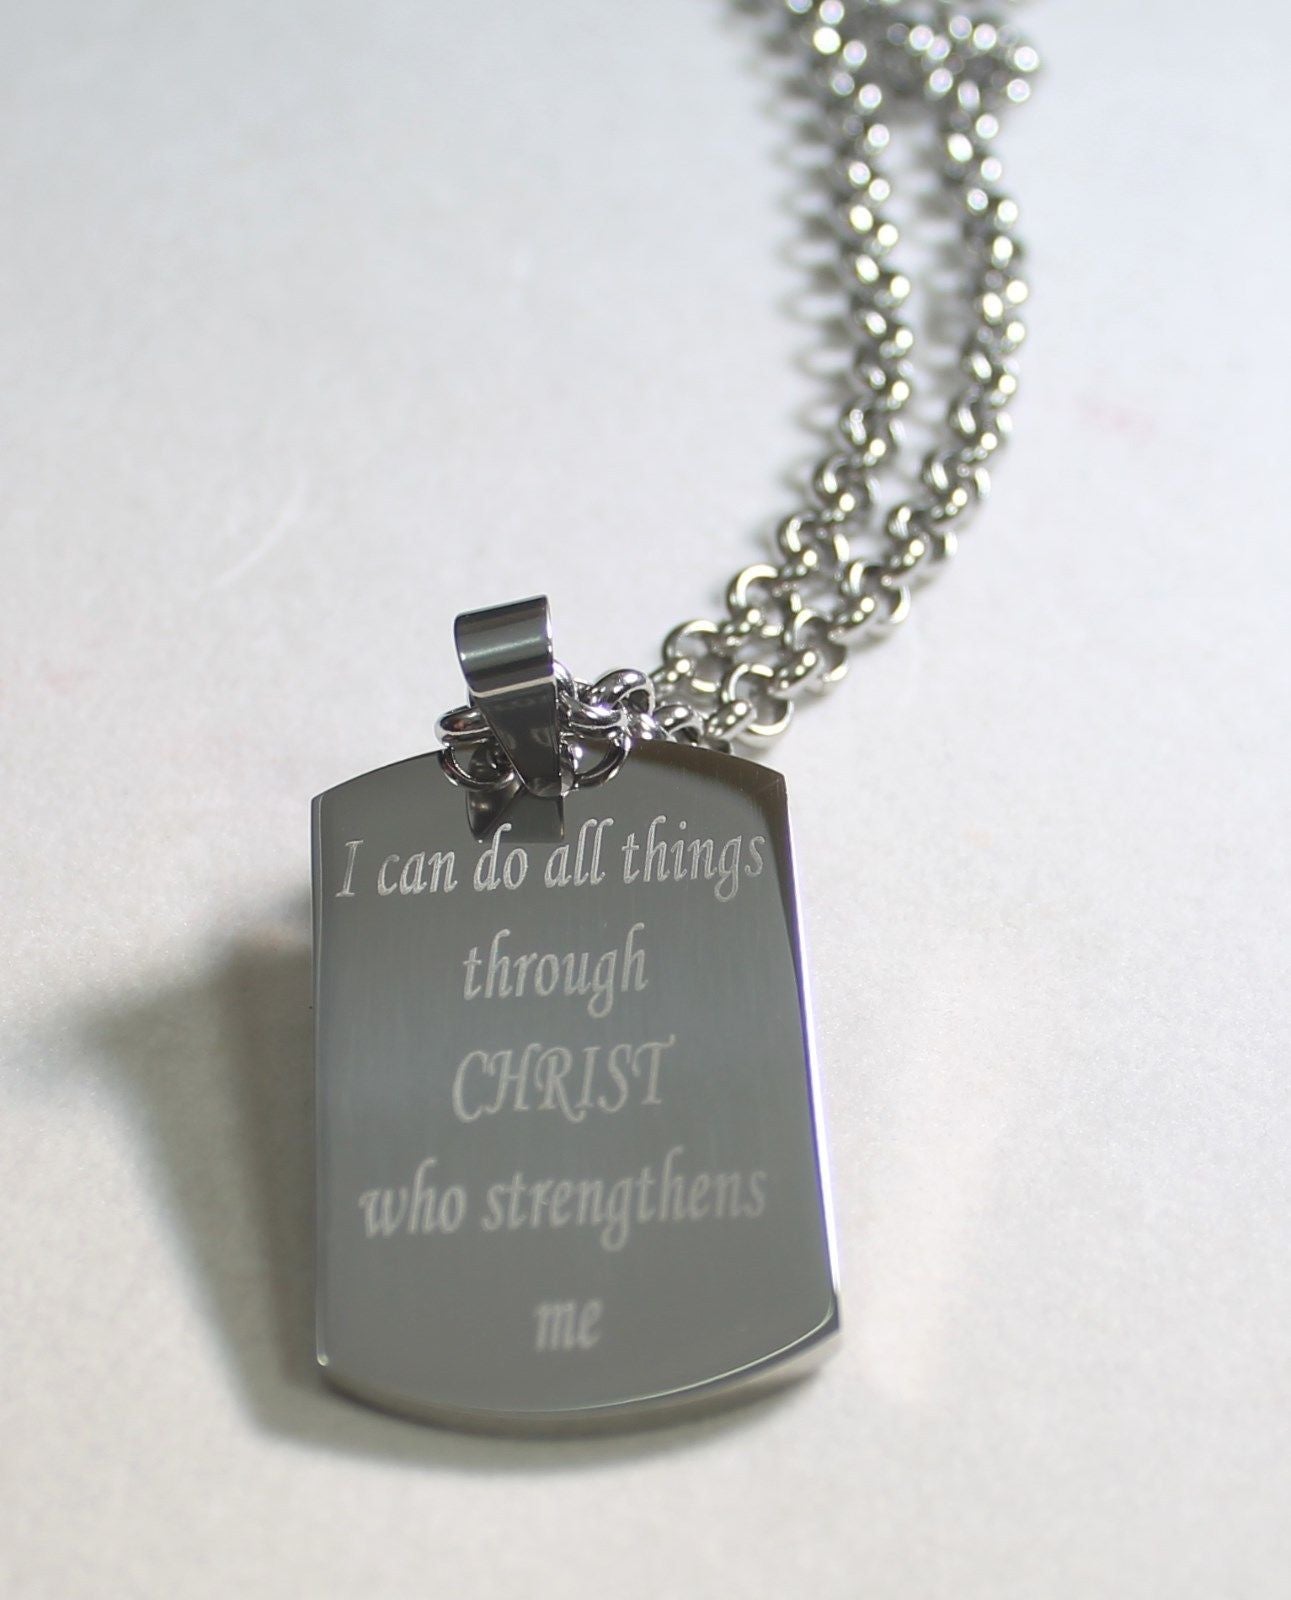 PRAYER I CAN DO ALL THINGS CHRIST THICK STAINLESS STEEL SOLID PENDANT DOG TAG - Samstagsandmore